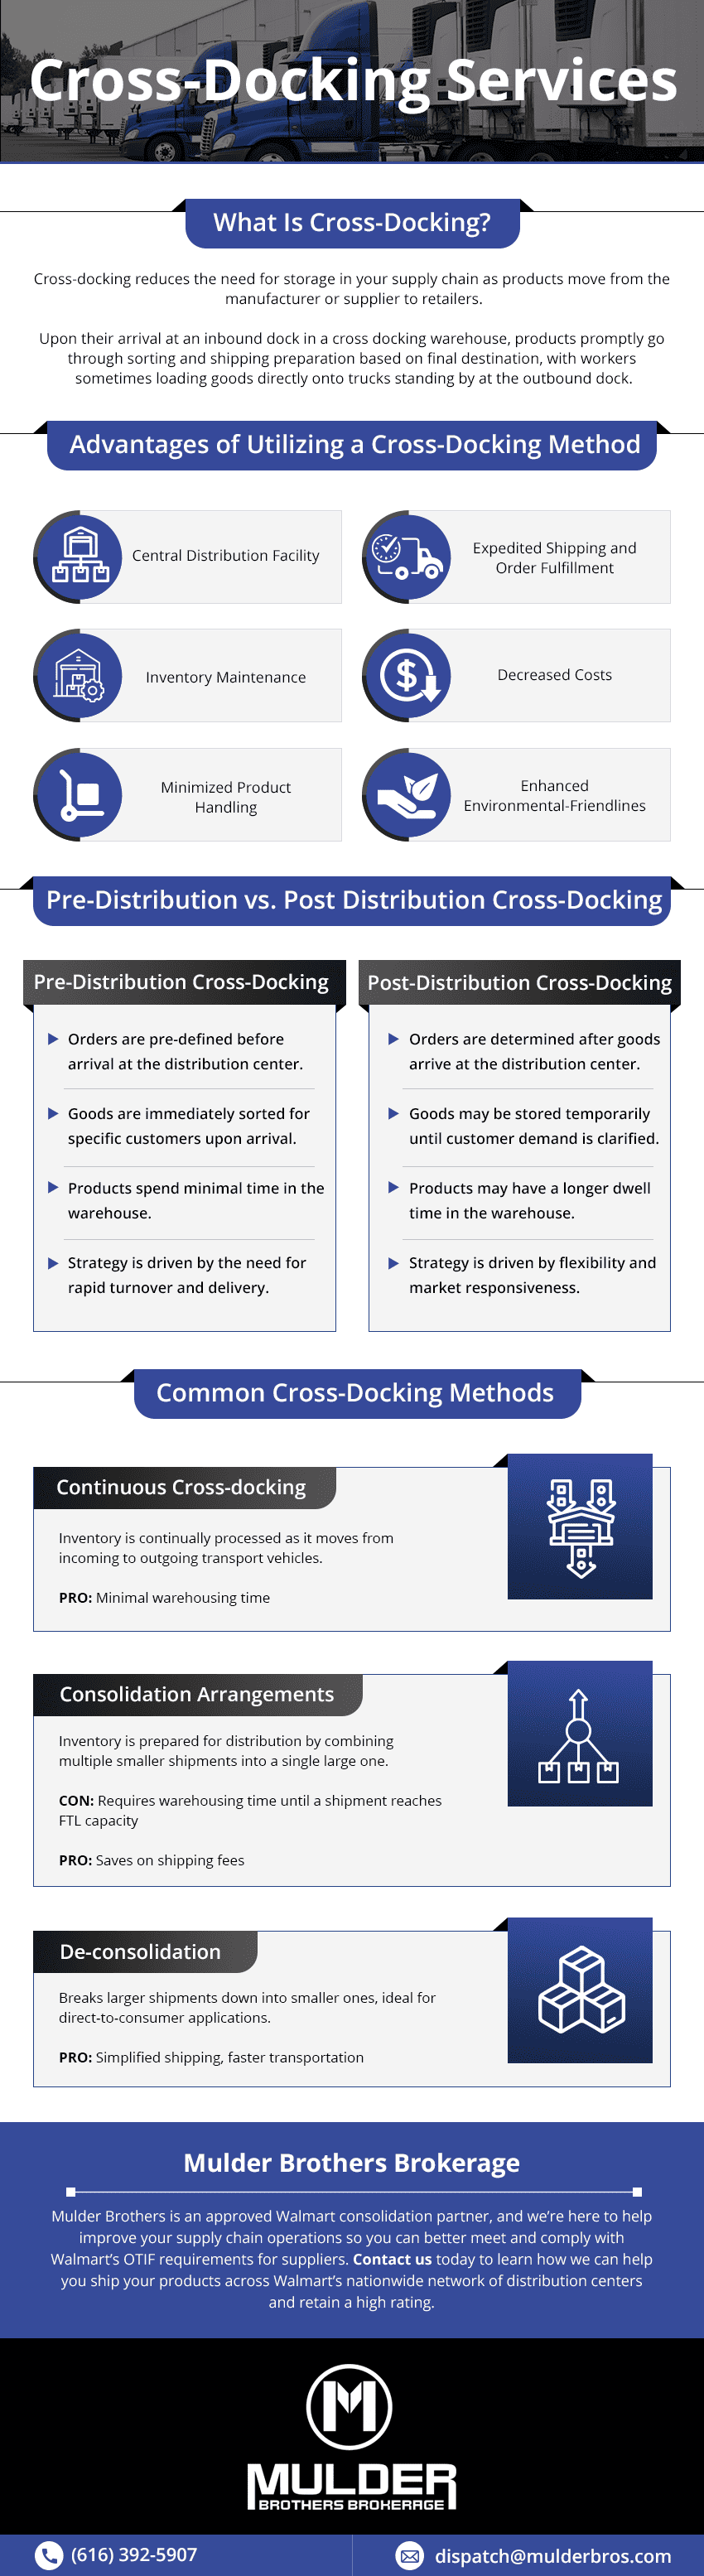 Cross-Docking Services